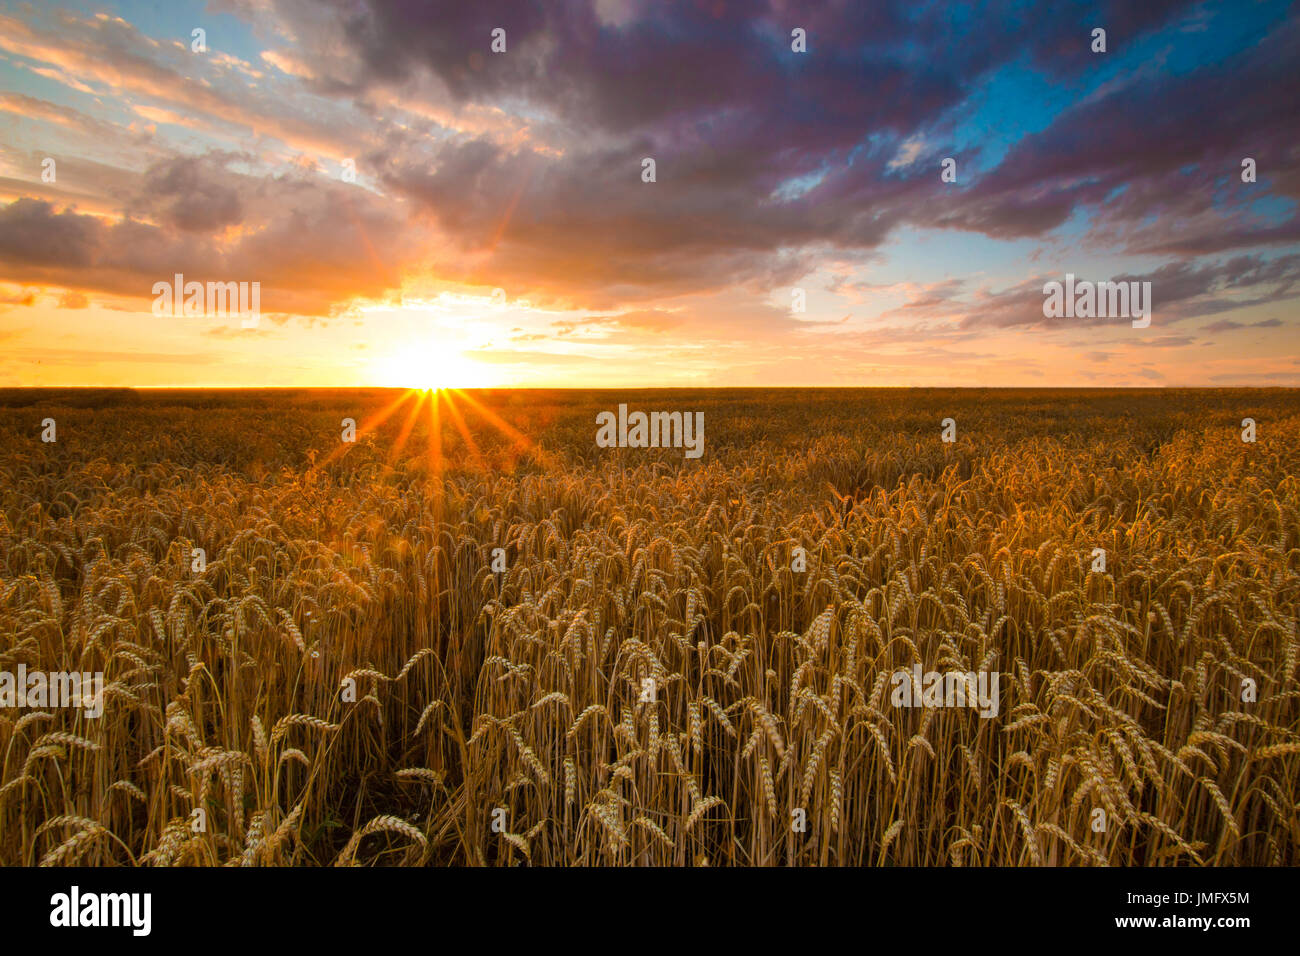 Colorful sunset over wheat field Stock Photo